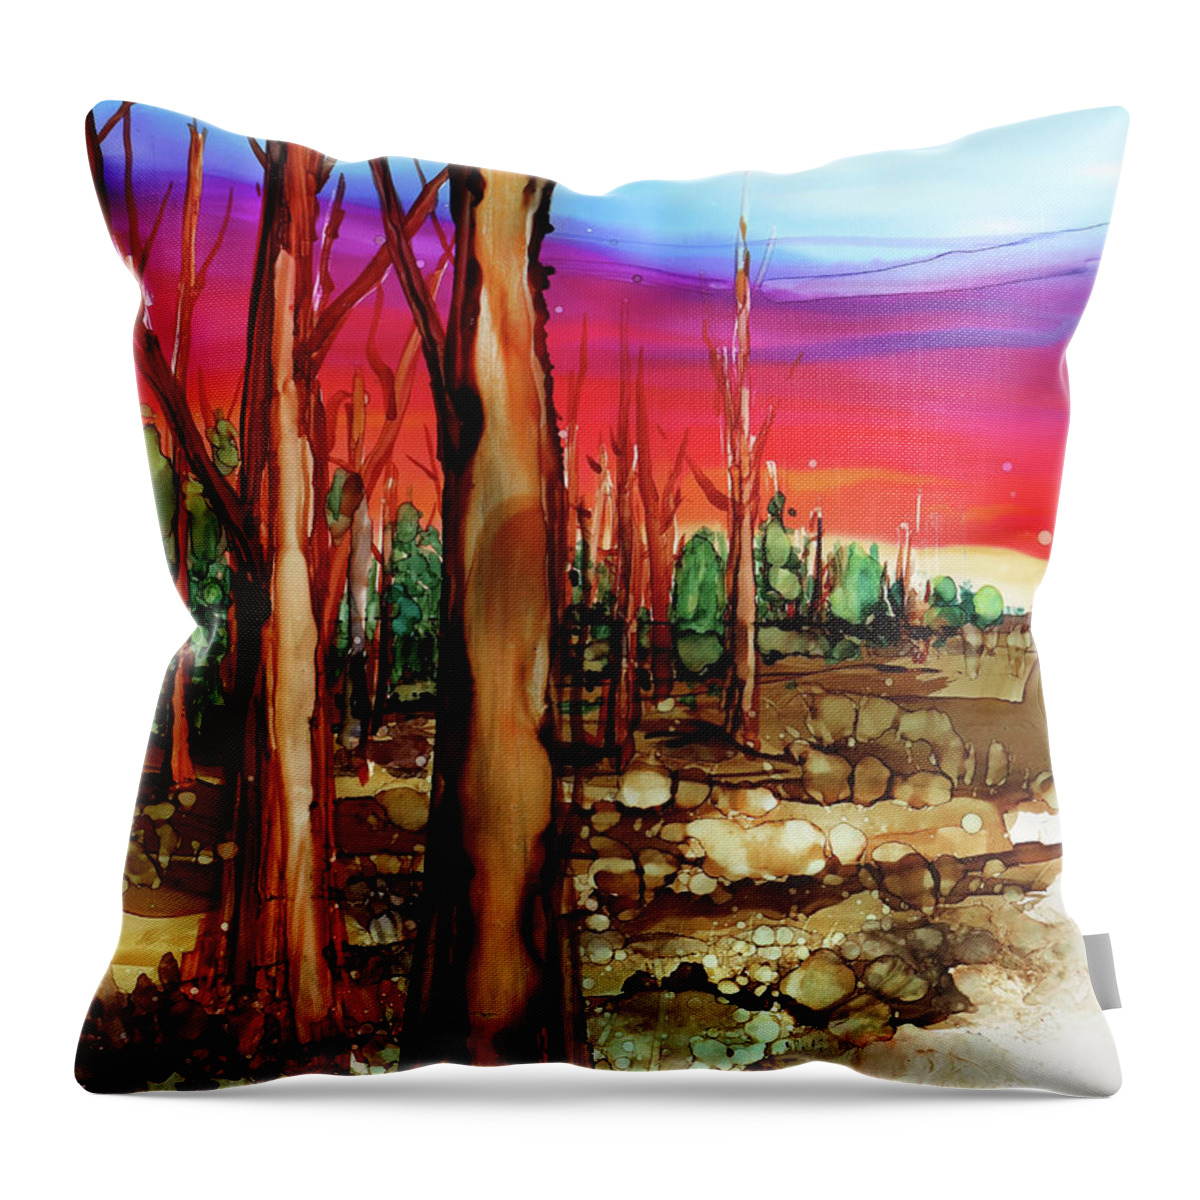  Throw Pillow featuring the painting Fire Sky by Julie Tibus